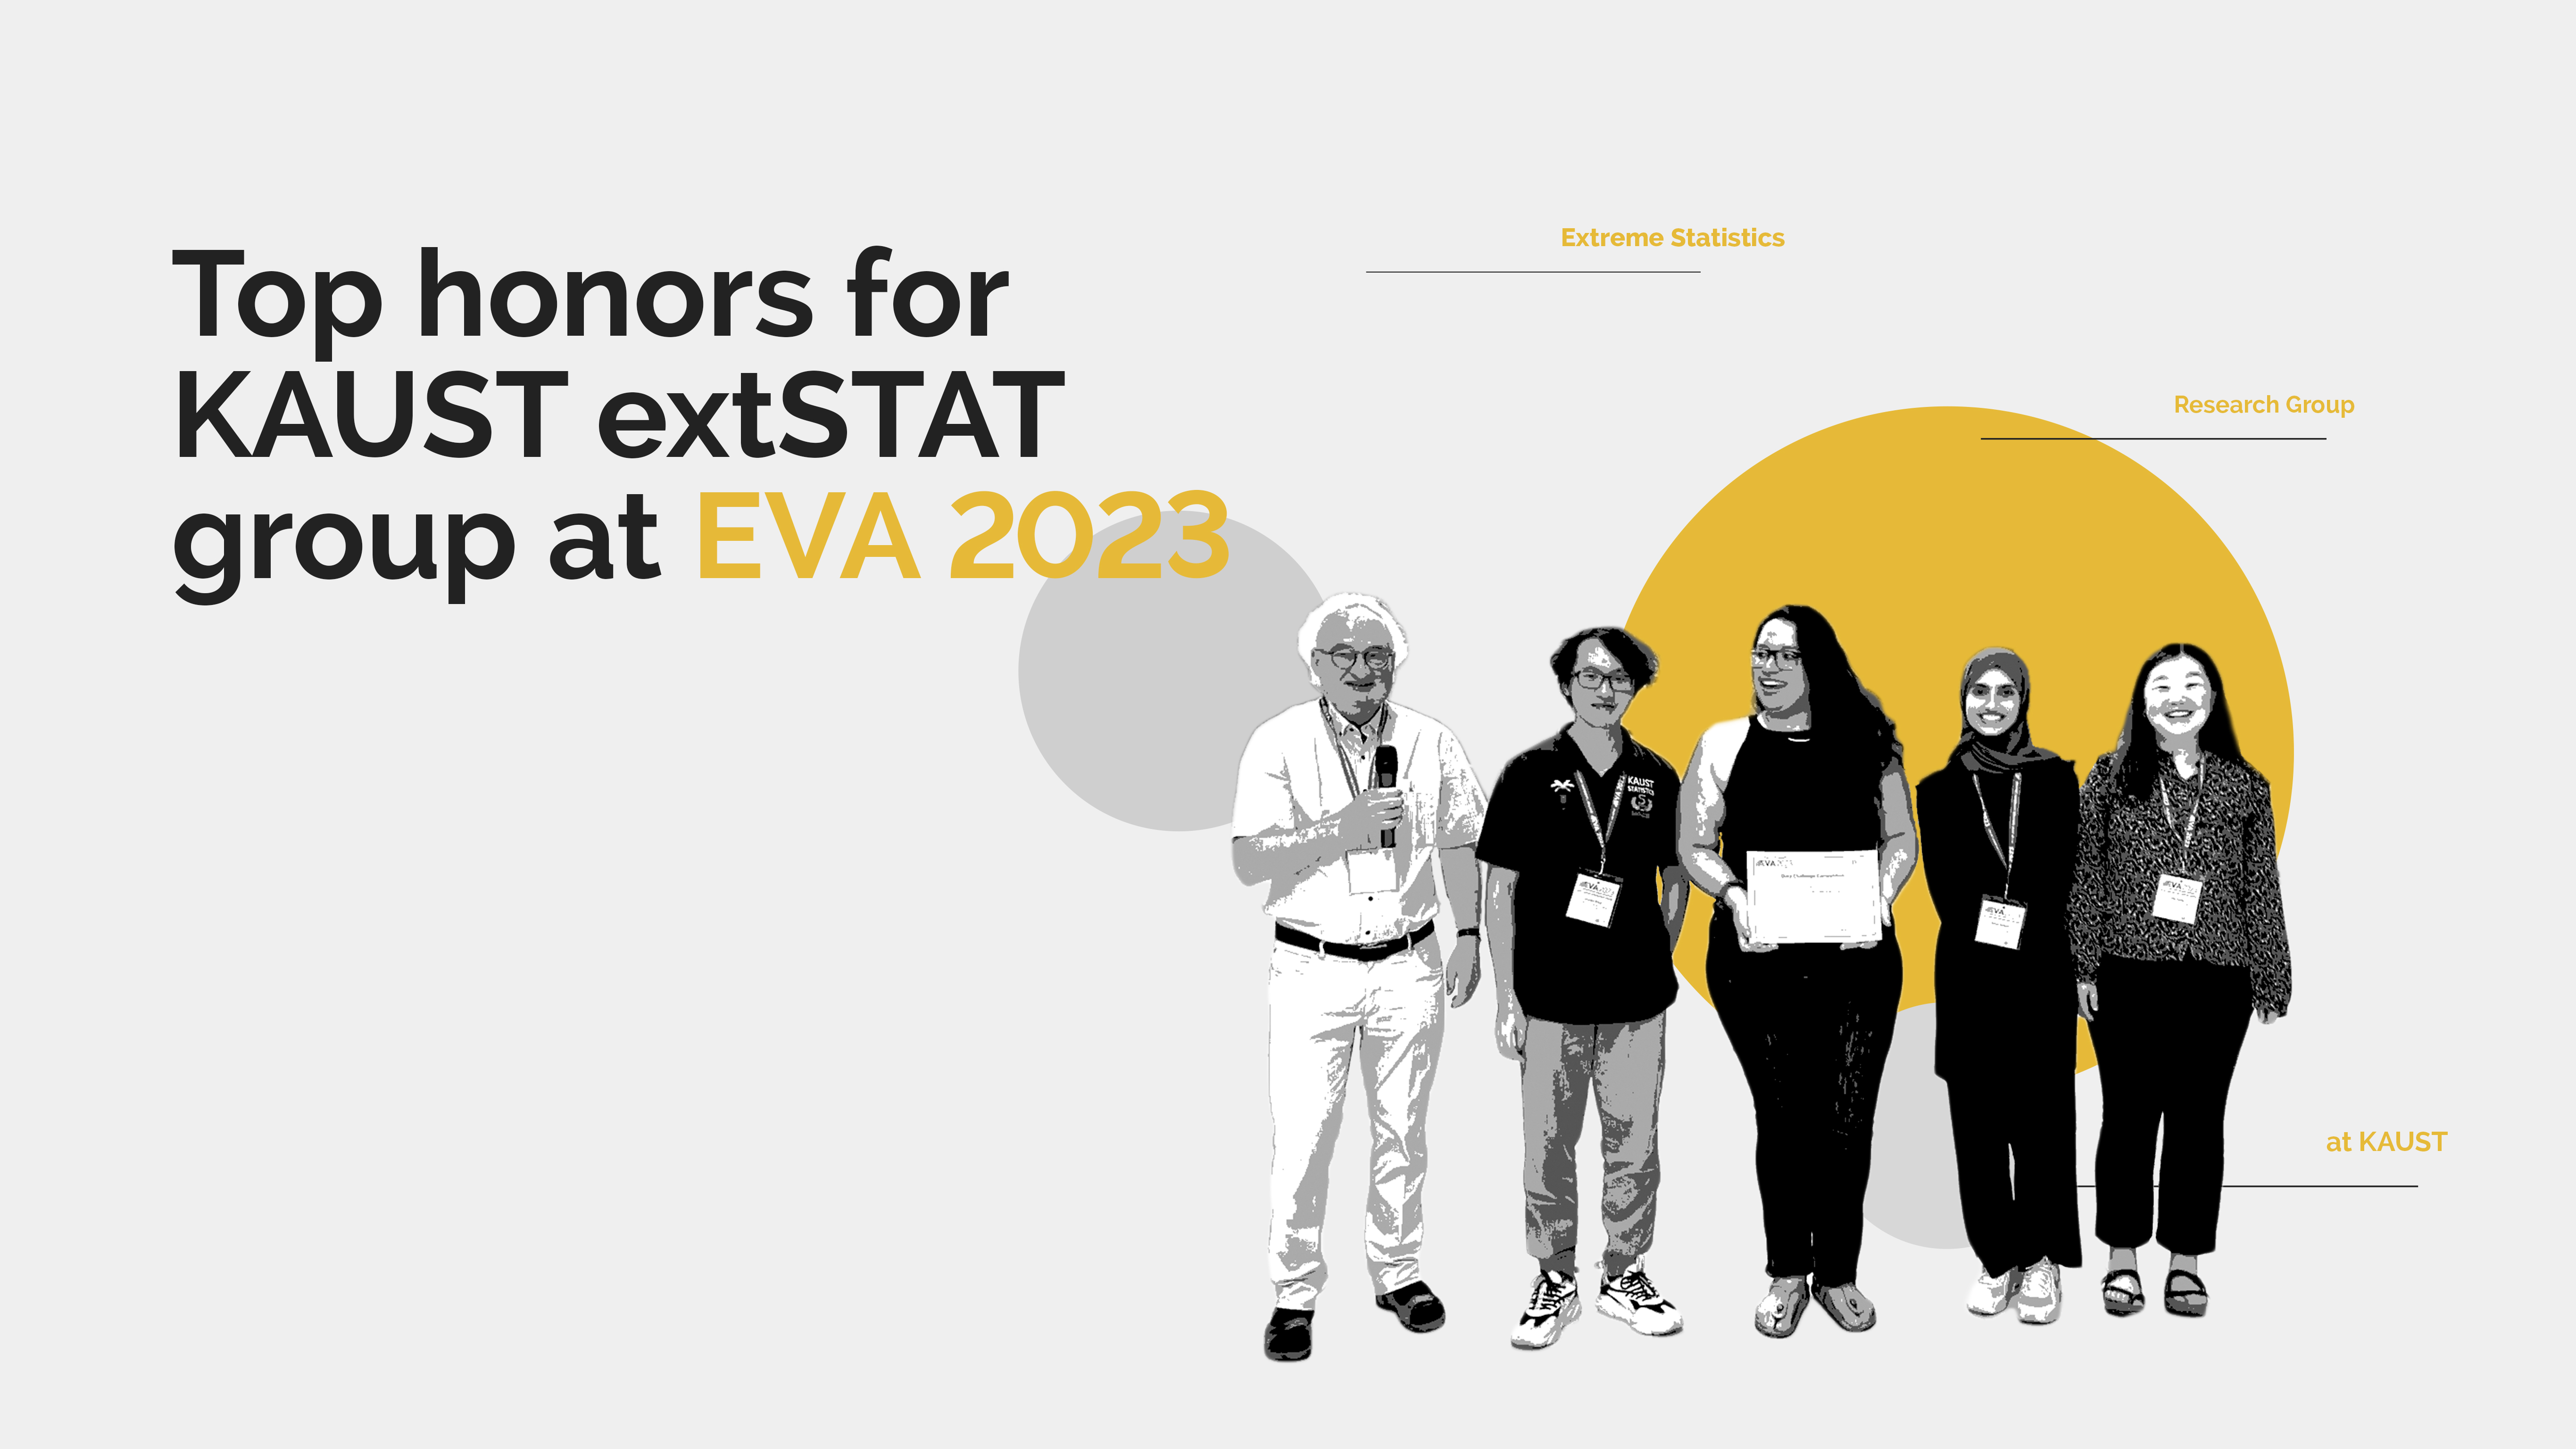 Top honors for KAUST extSTAT group at EVA 2023